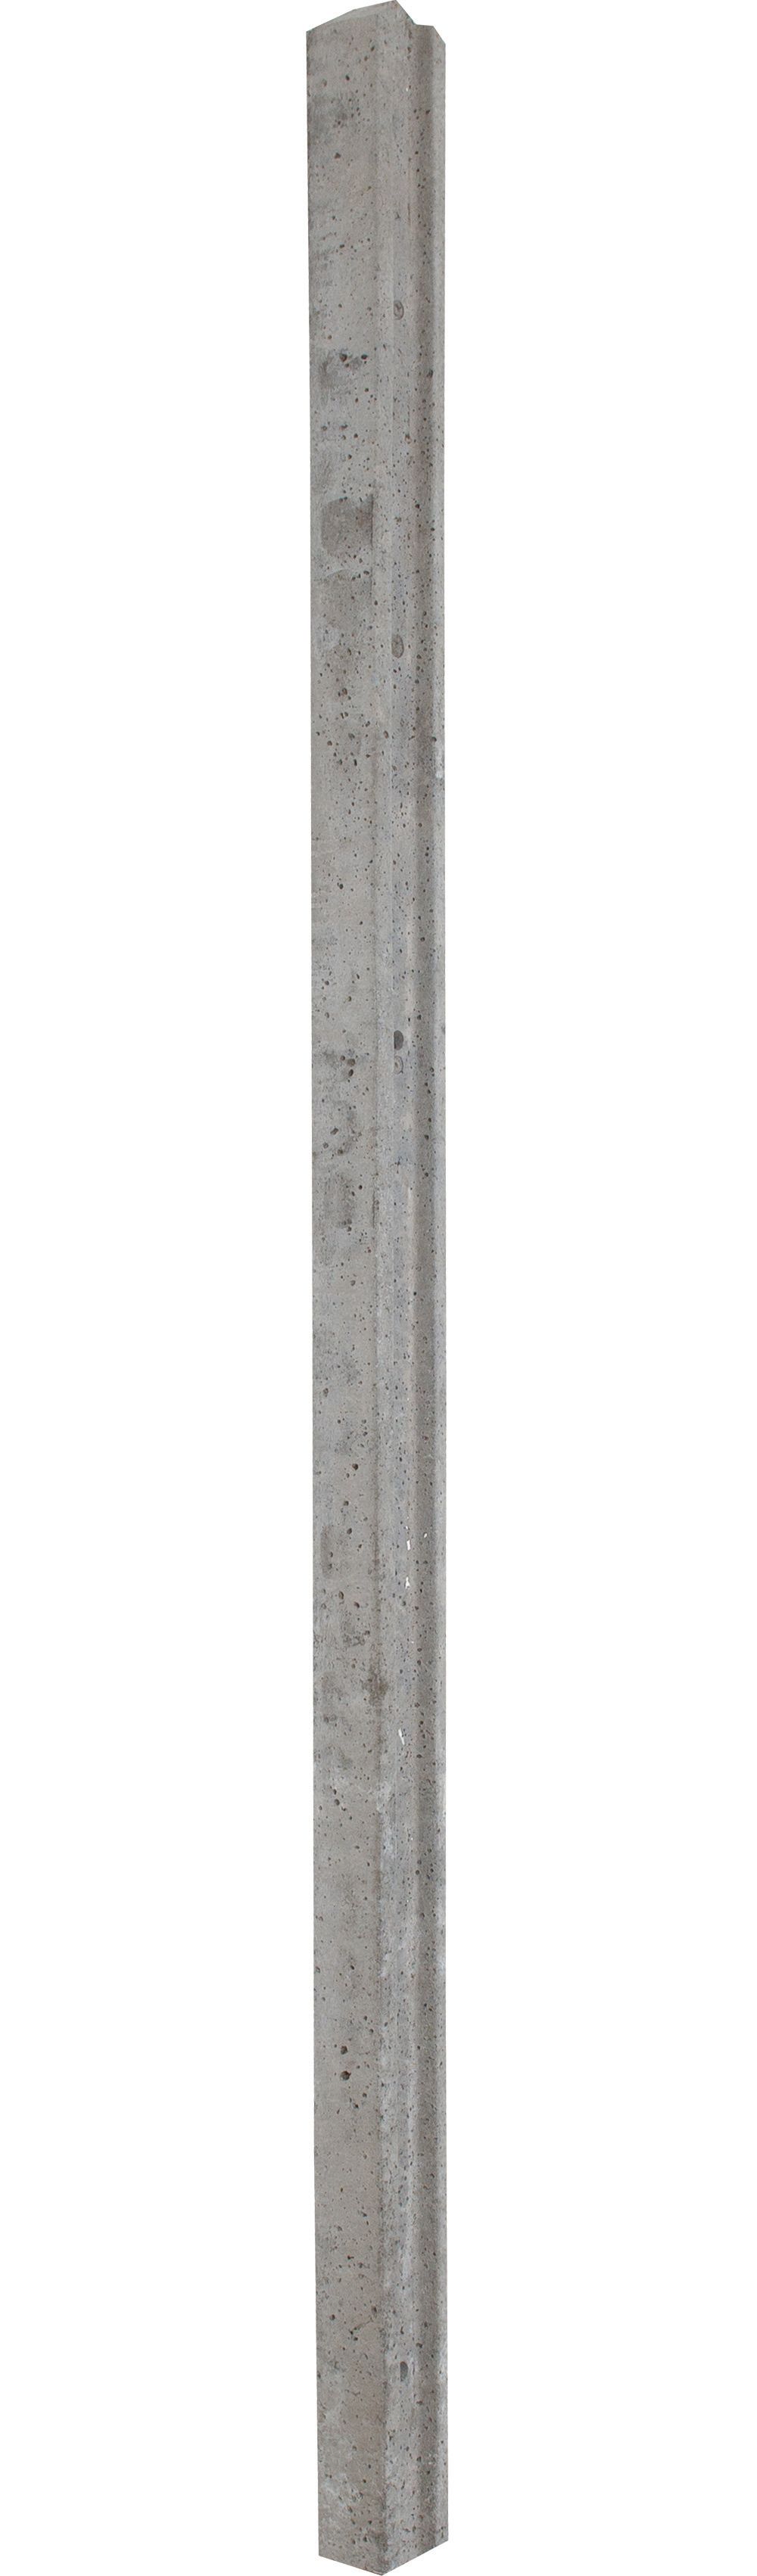 Wickes Slotted Concrete Fence Post - 60 x 100 x 1800mm